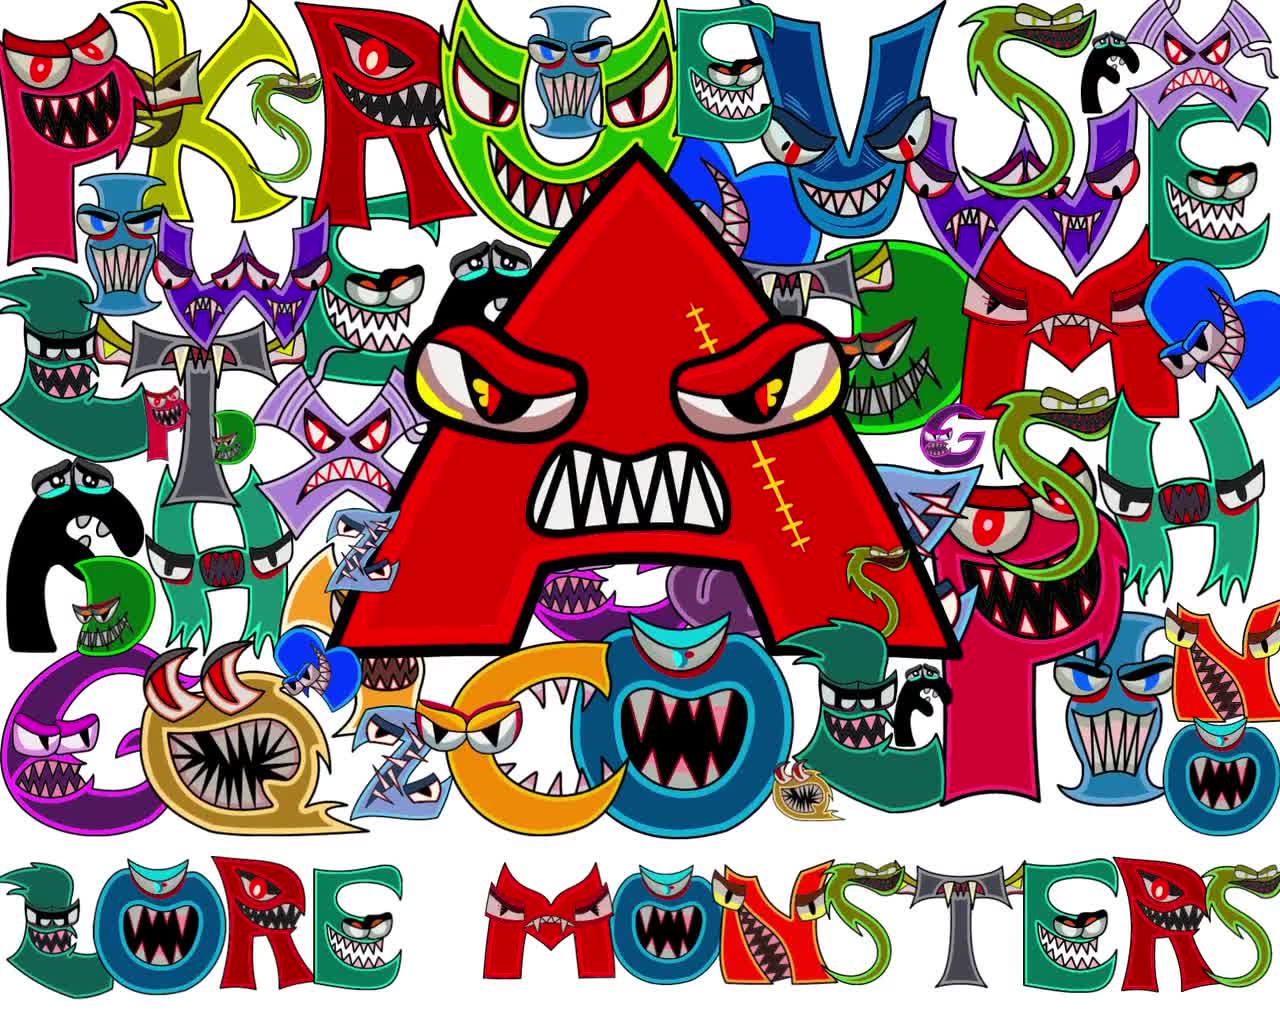 Monster School : BABY MONSTERS ALPHABET LORE (A-Z) DRAWING